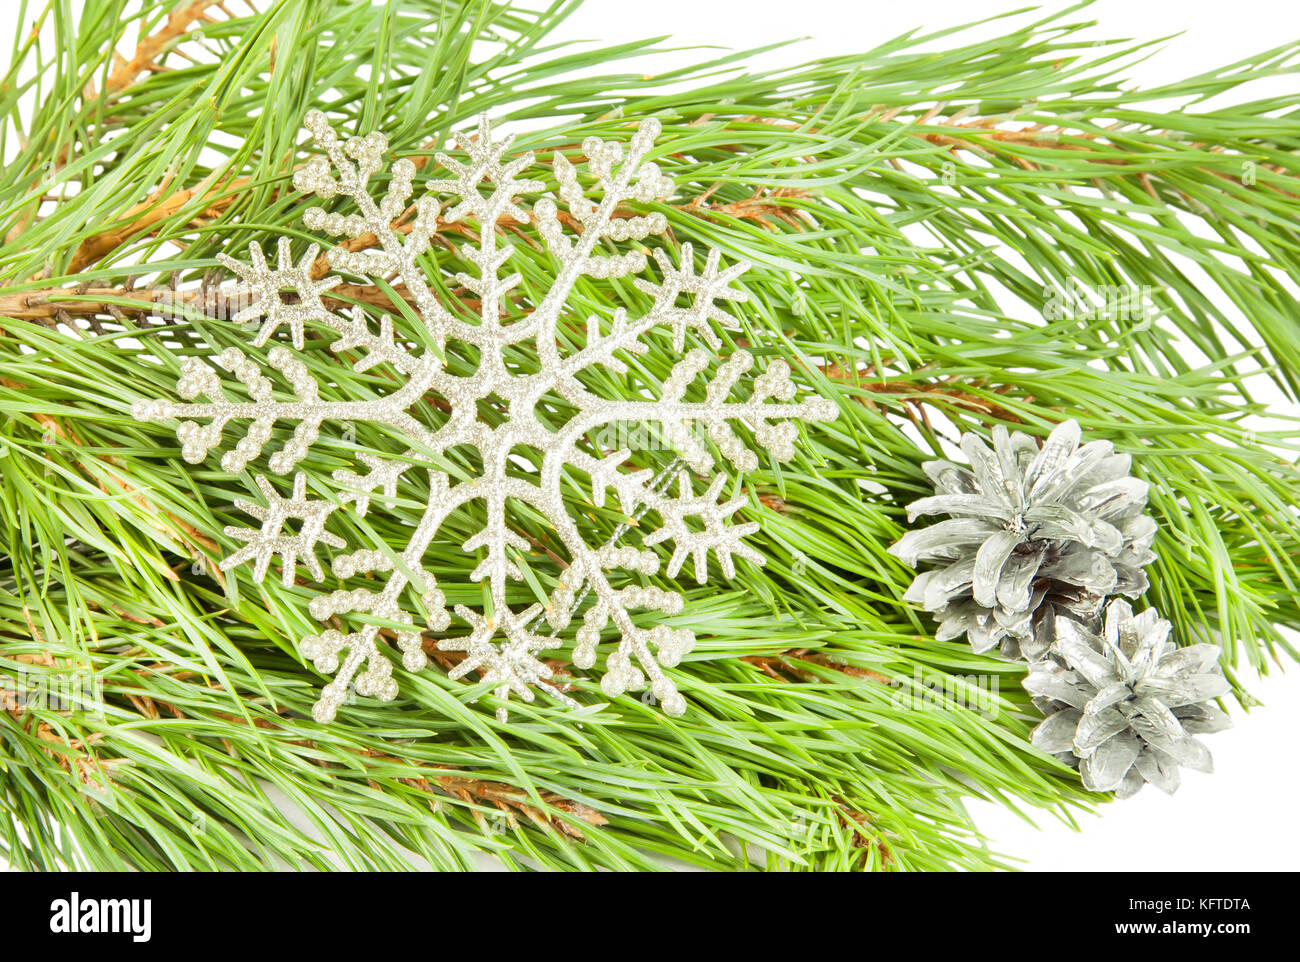 Artificial new year snowflake on fir tree branch background Stock Photo